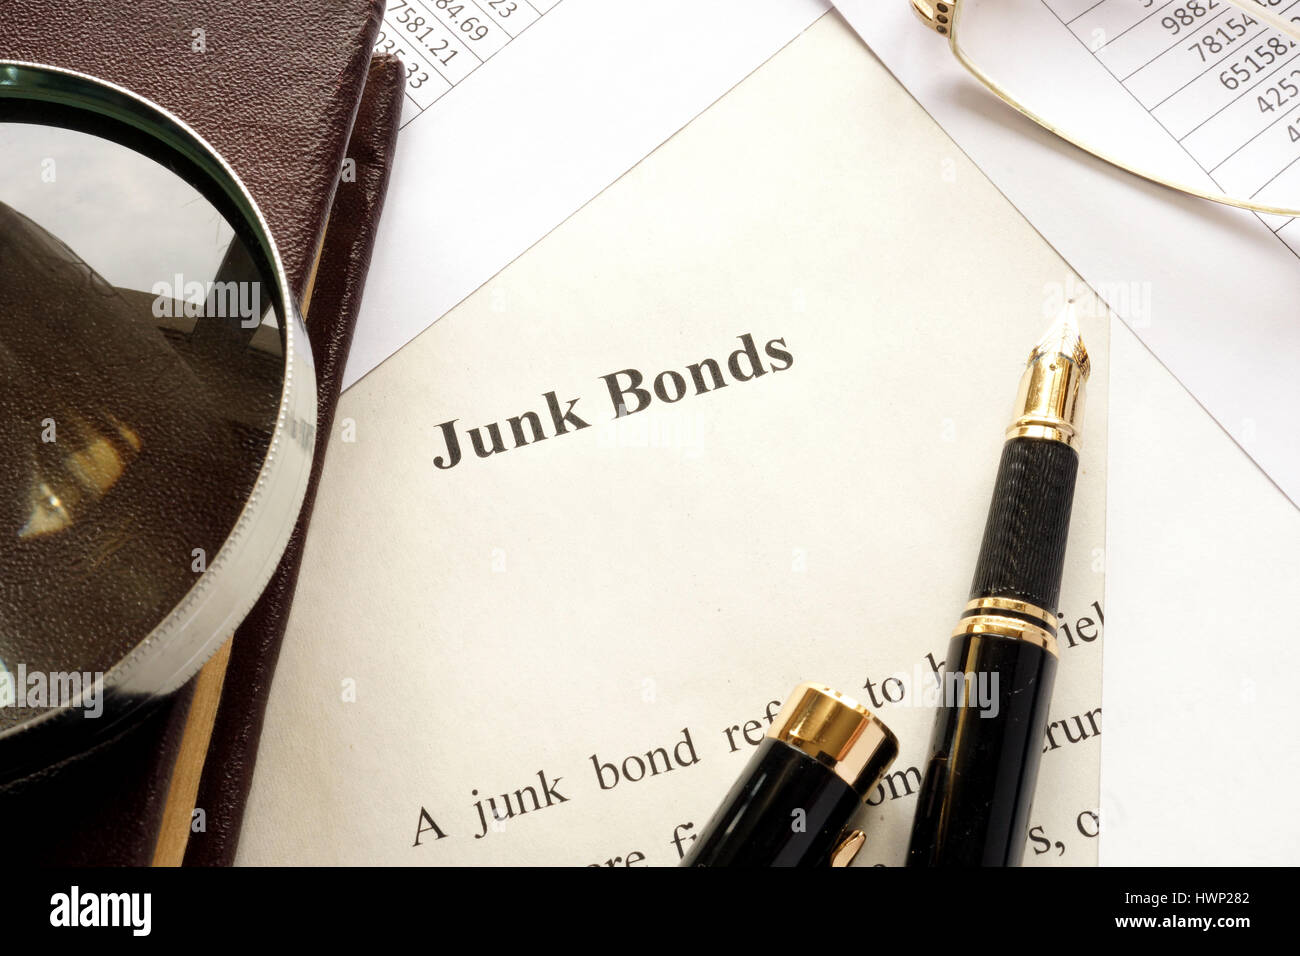 Paper with a title junk bonds and other financial documents. Stock Photo